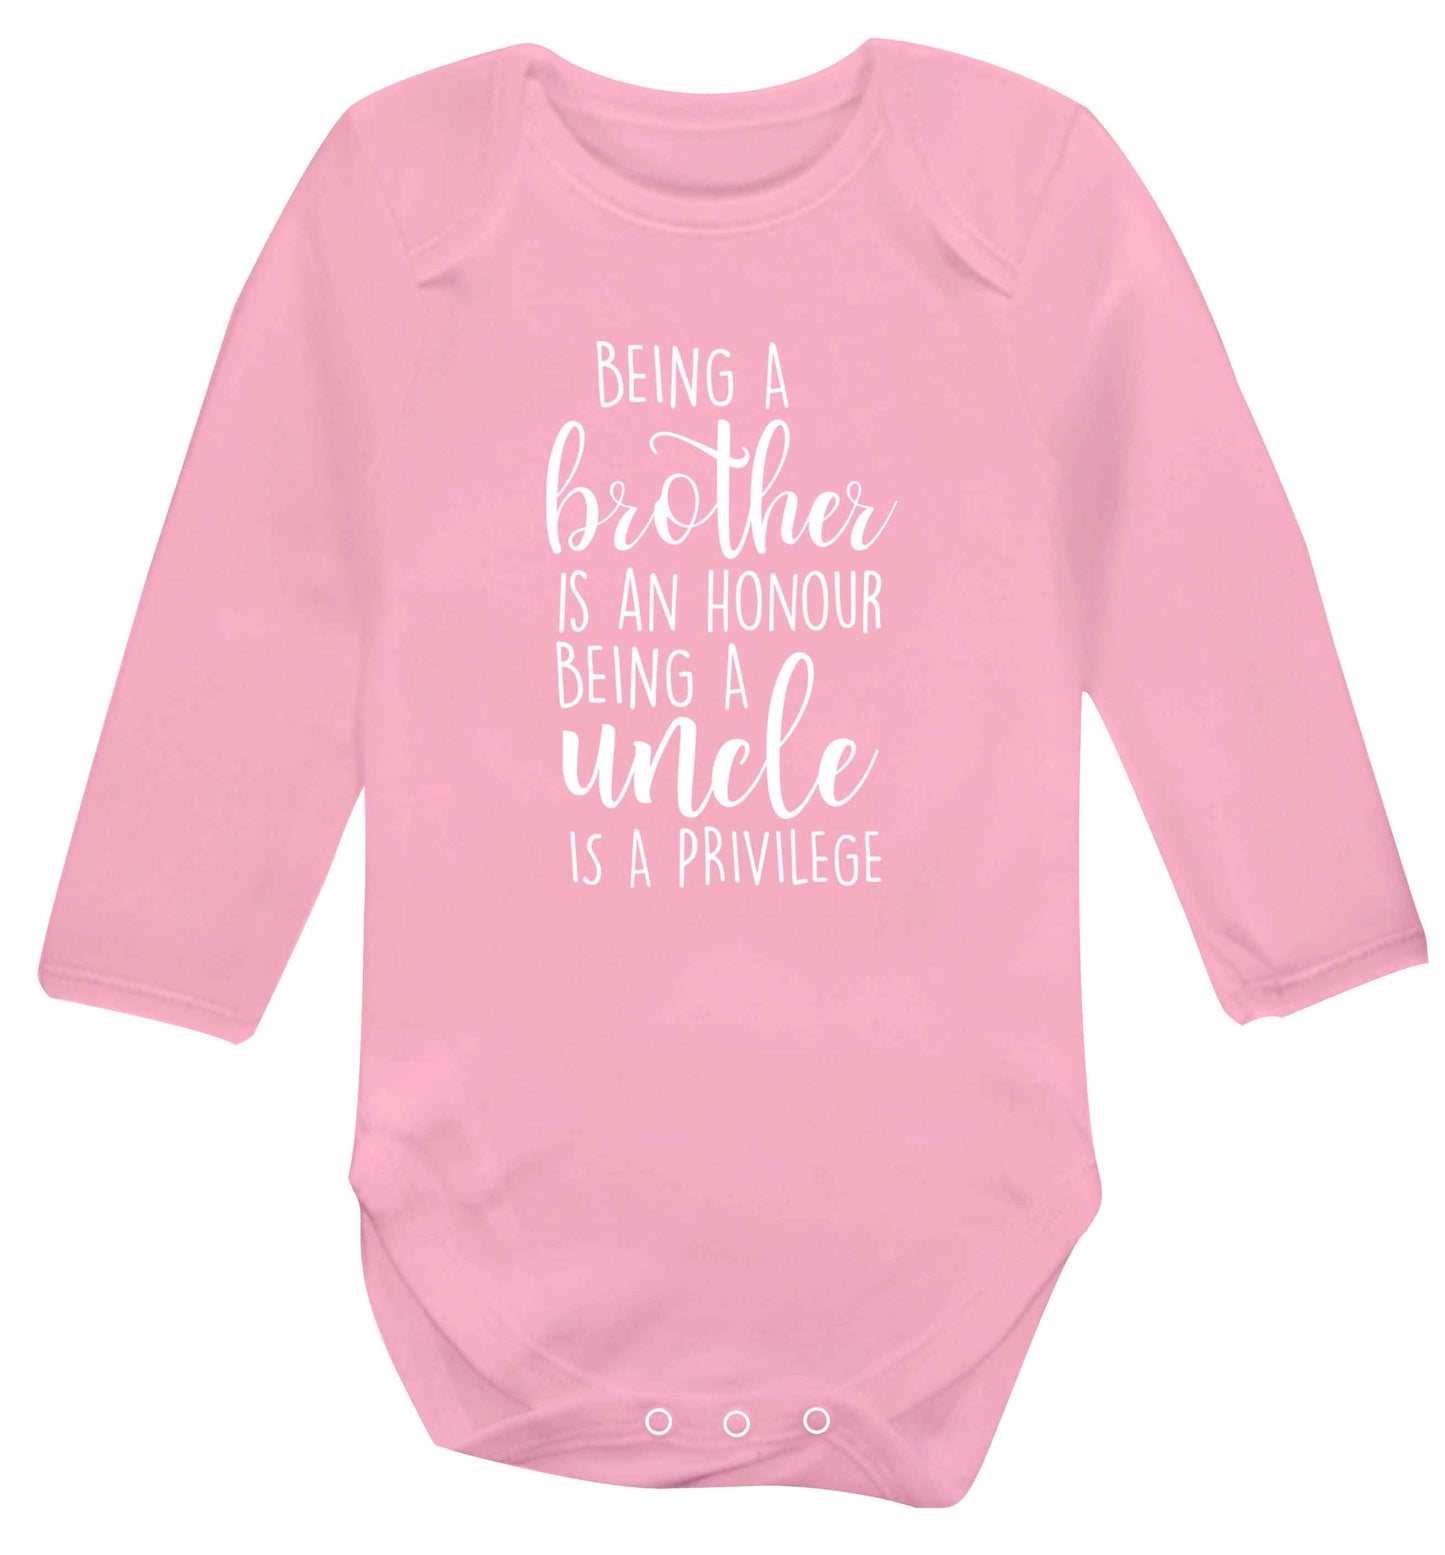 Being a brother is an honour being an uncle is a privilege Baby Vest long sleeved pale pink 6-12 months